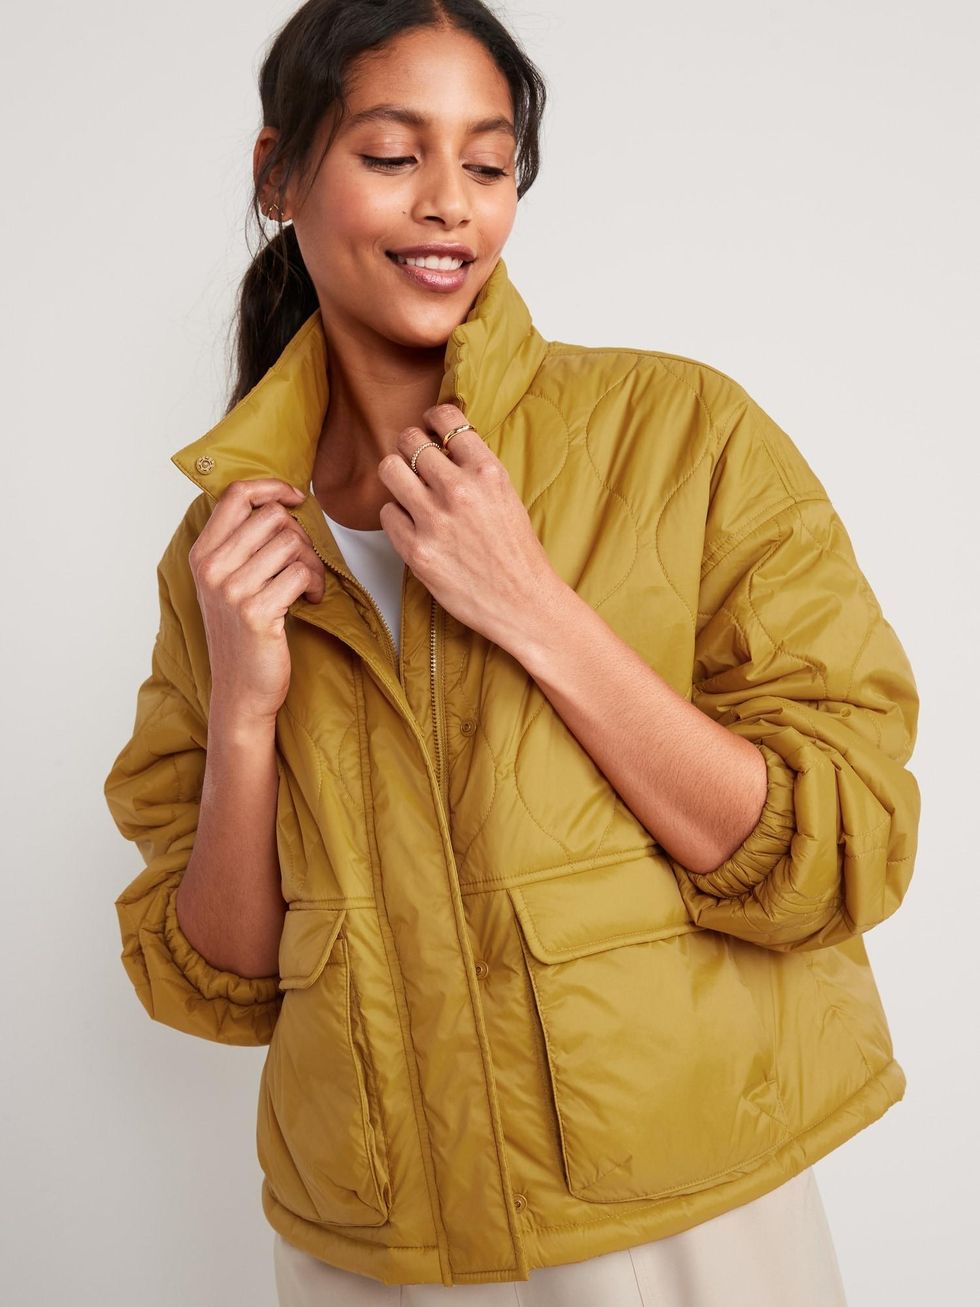 15 Light Jackets For Women To Wear This Fall | Brit + Co - Brit + Co